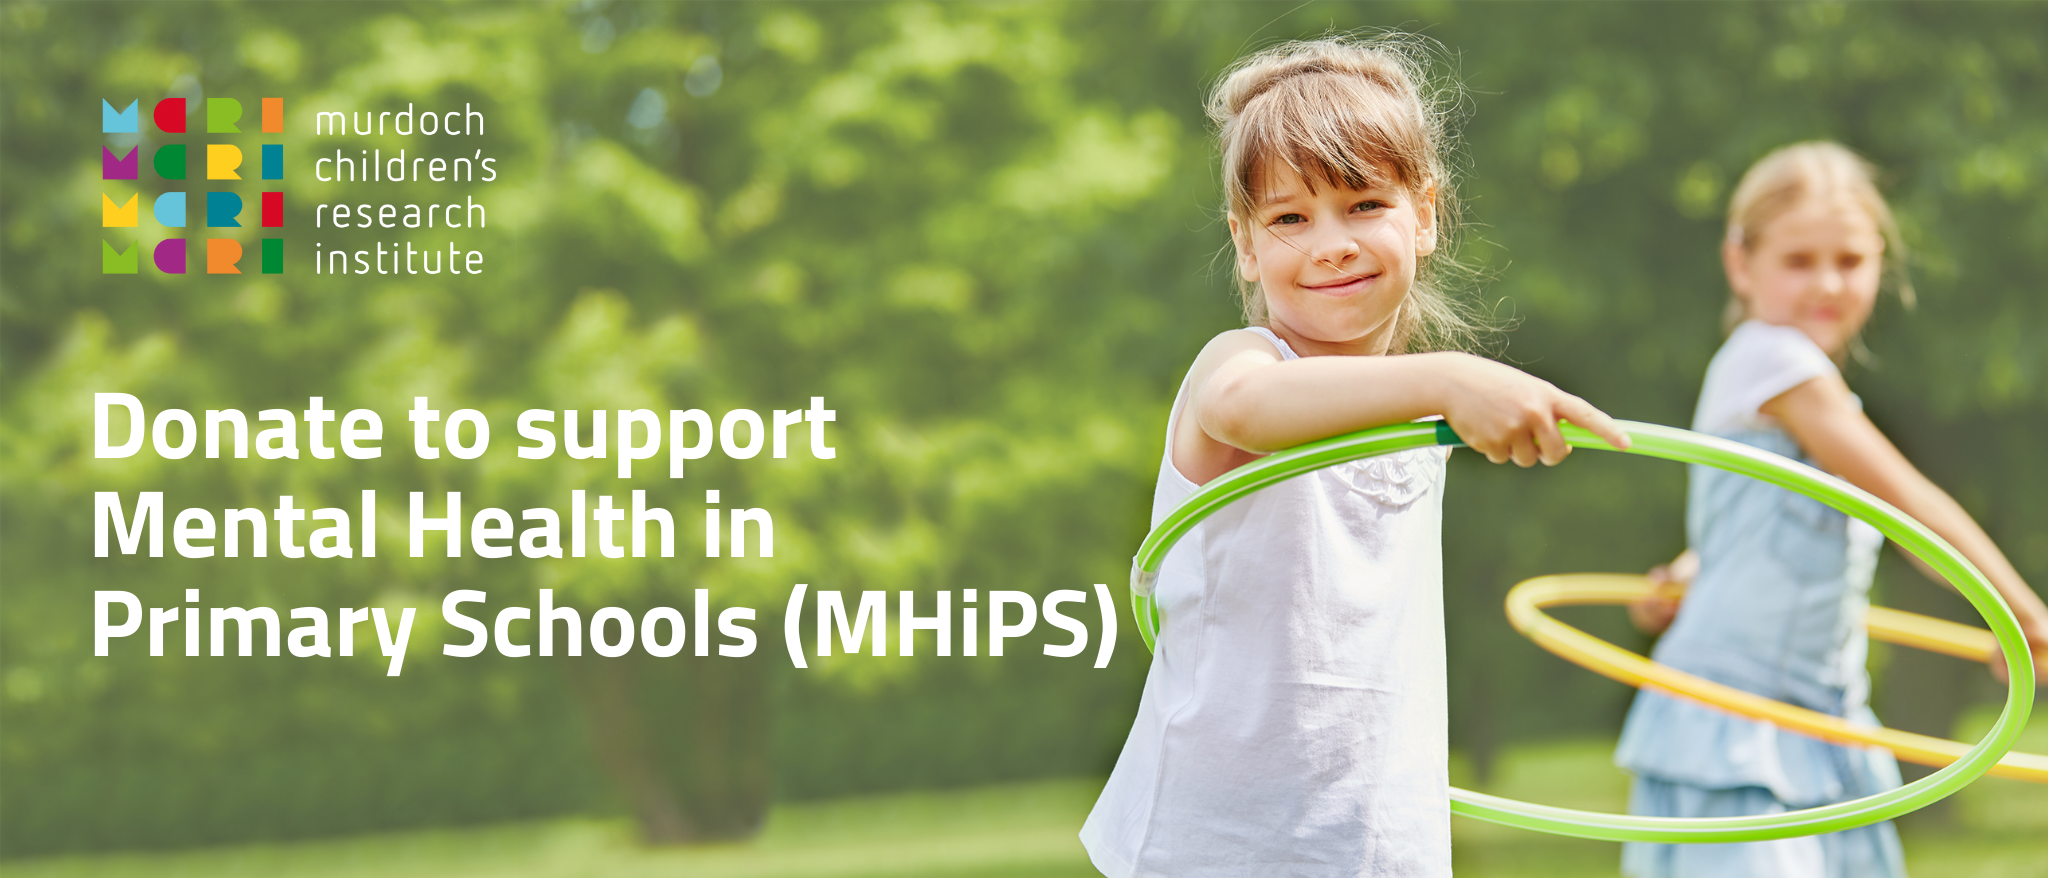 Donate to support Mental Health in Primary Schools (MHiPS)